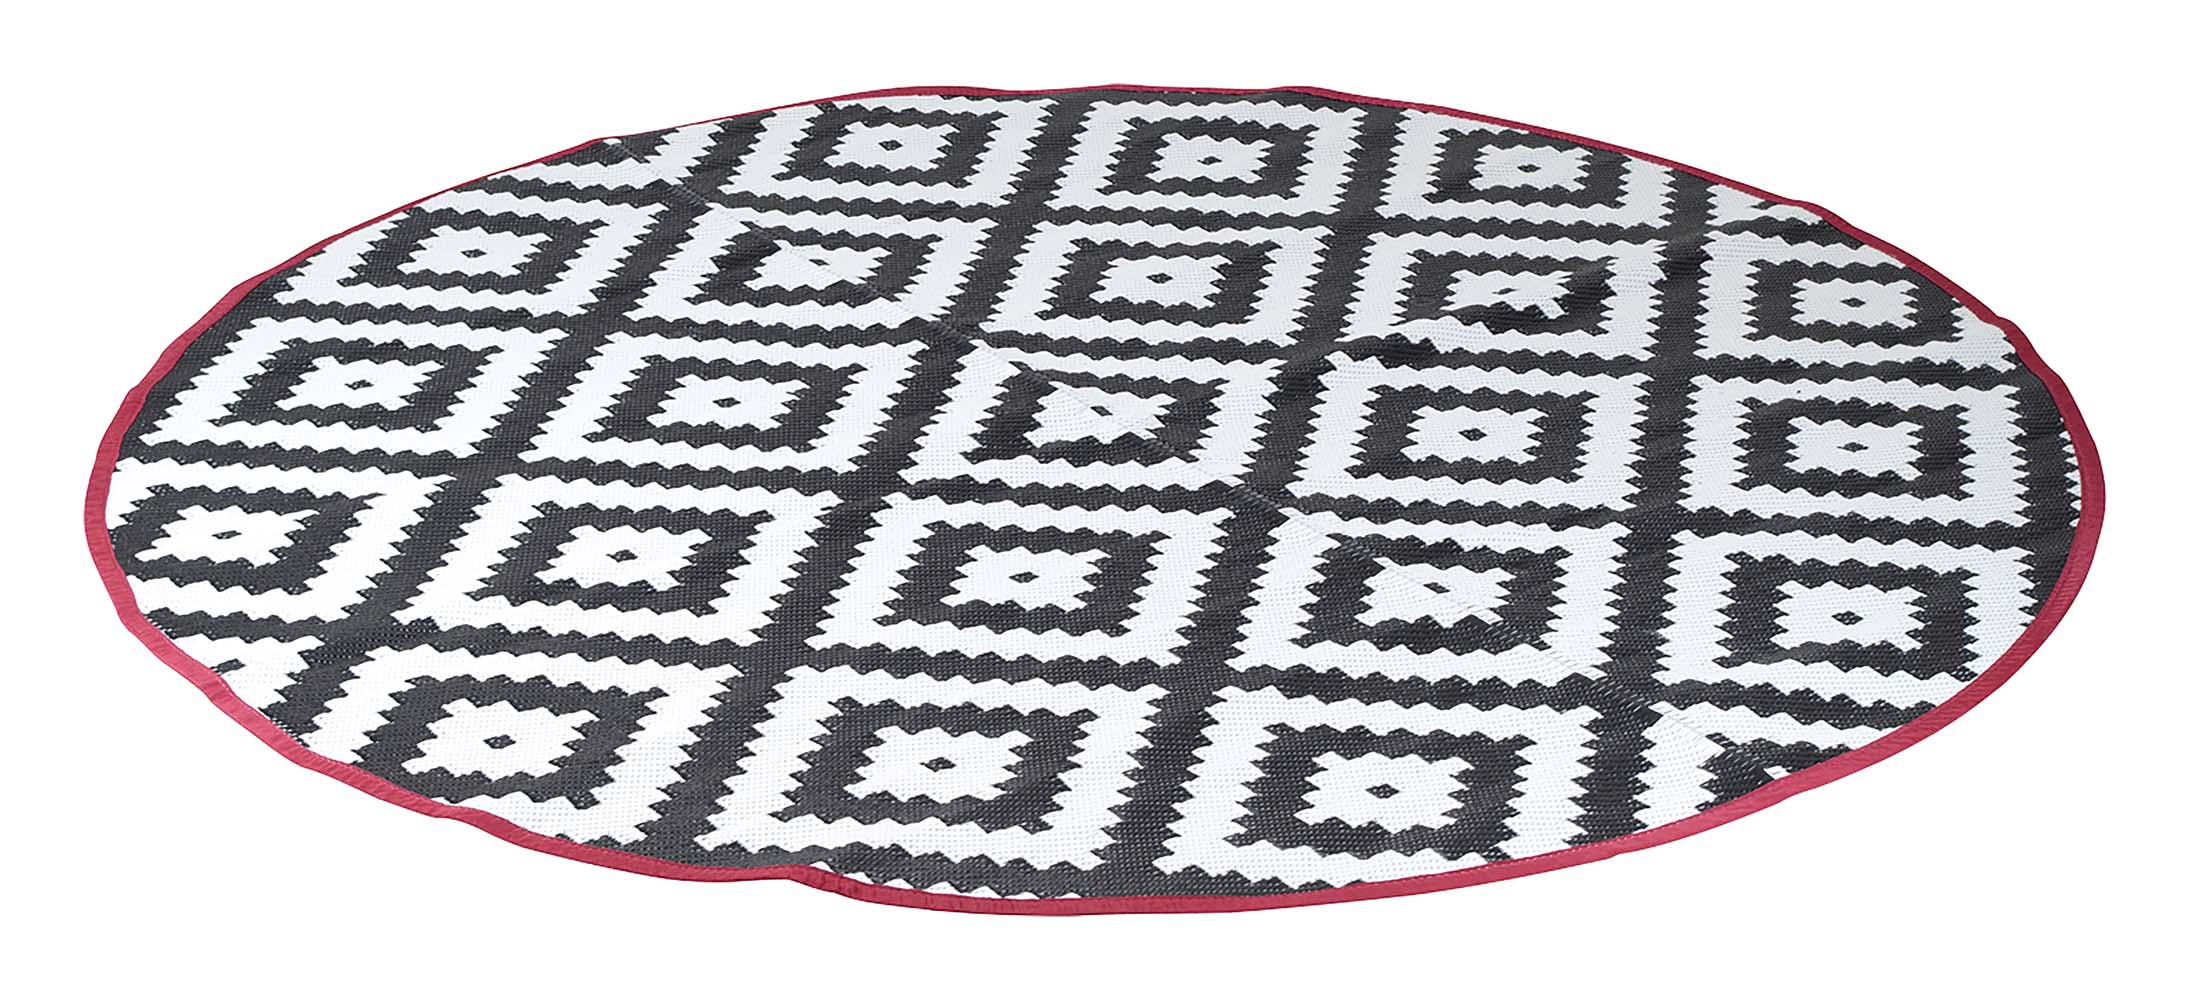 Bo-Camp - Urban Outdoor collection - Chill mat - Falconwood  - Round detail 2